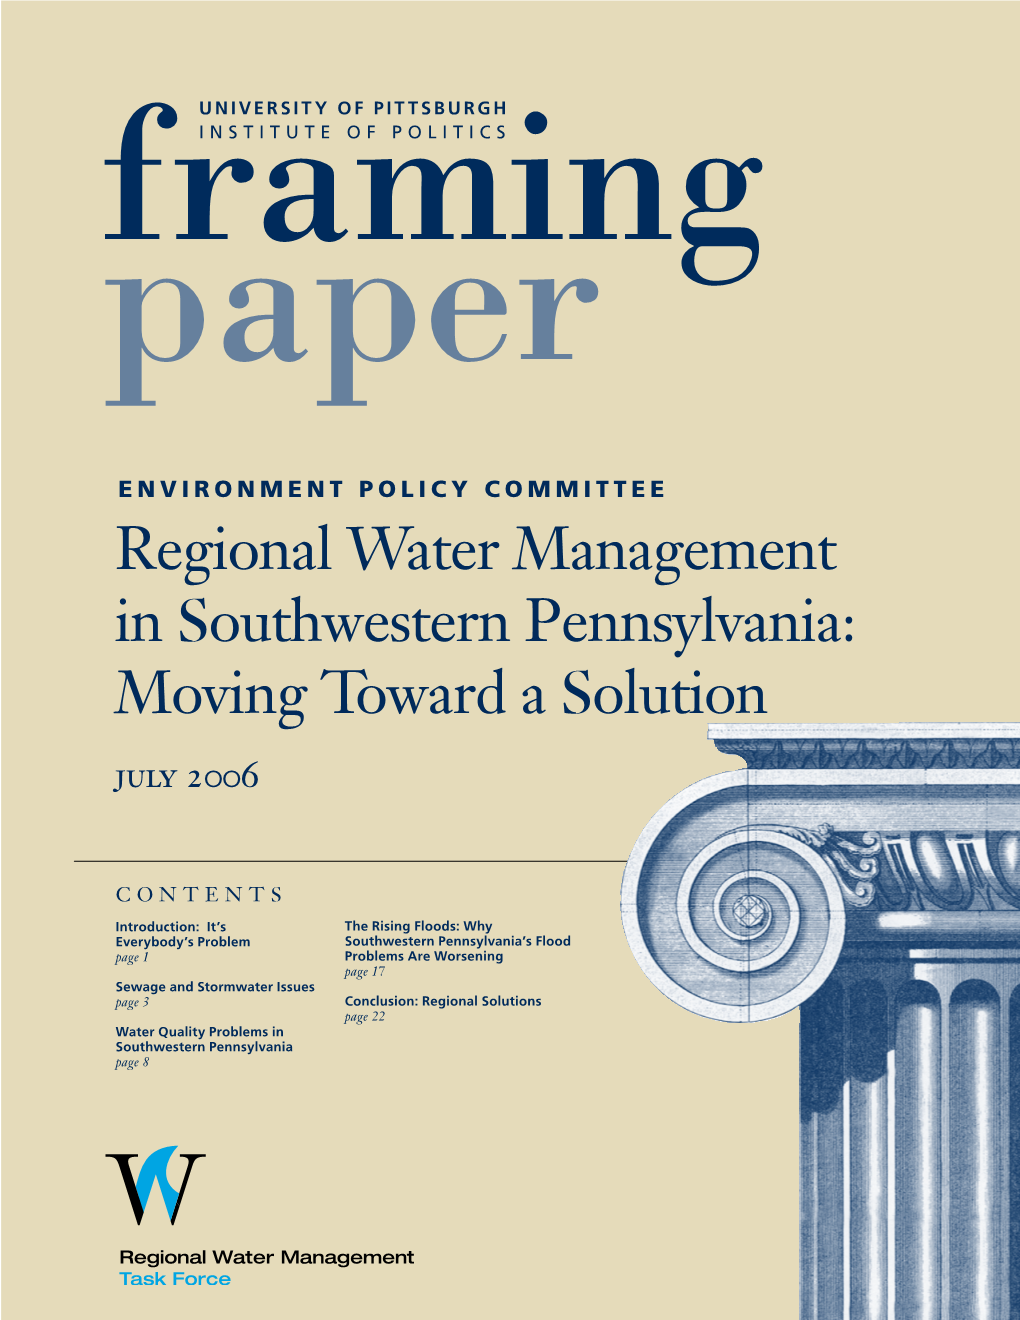 Regional Water Management in Southwestern Pennsylvania: Moving Toward a Solution July 2006